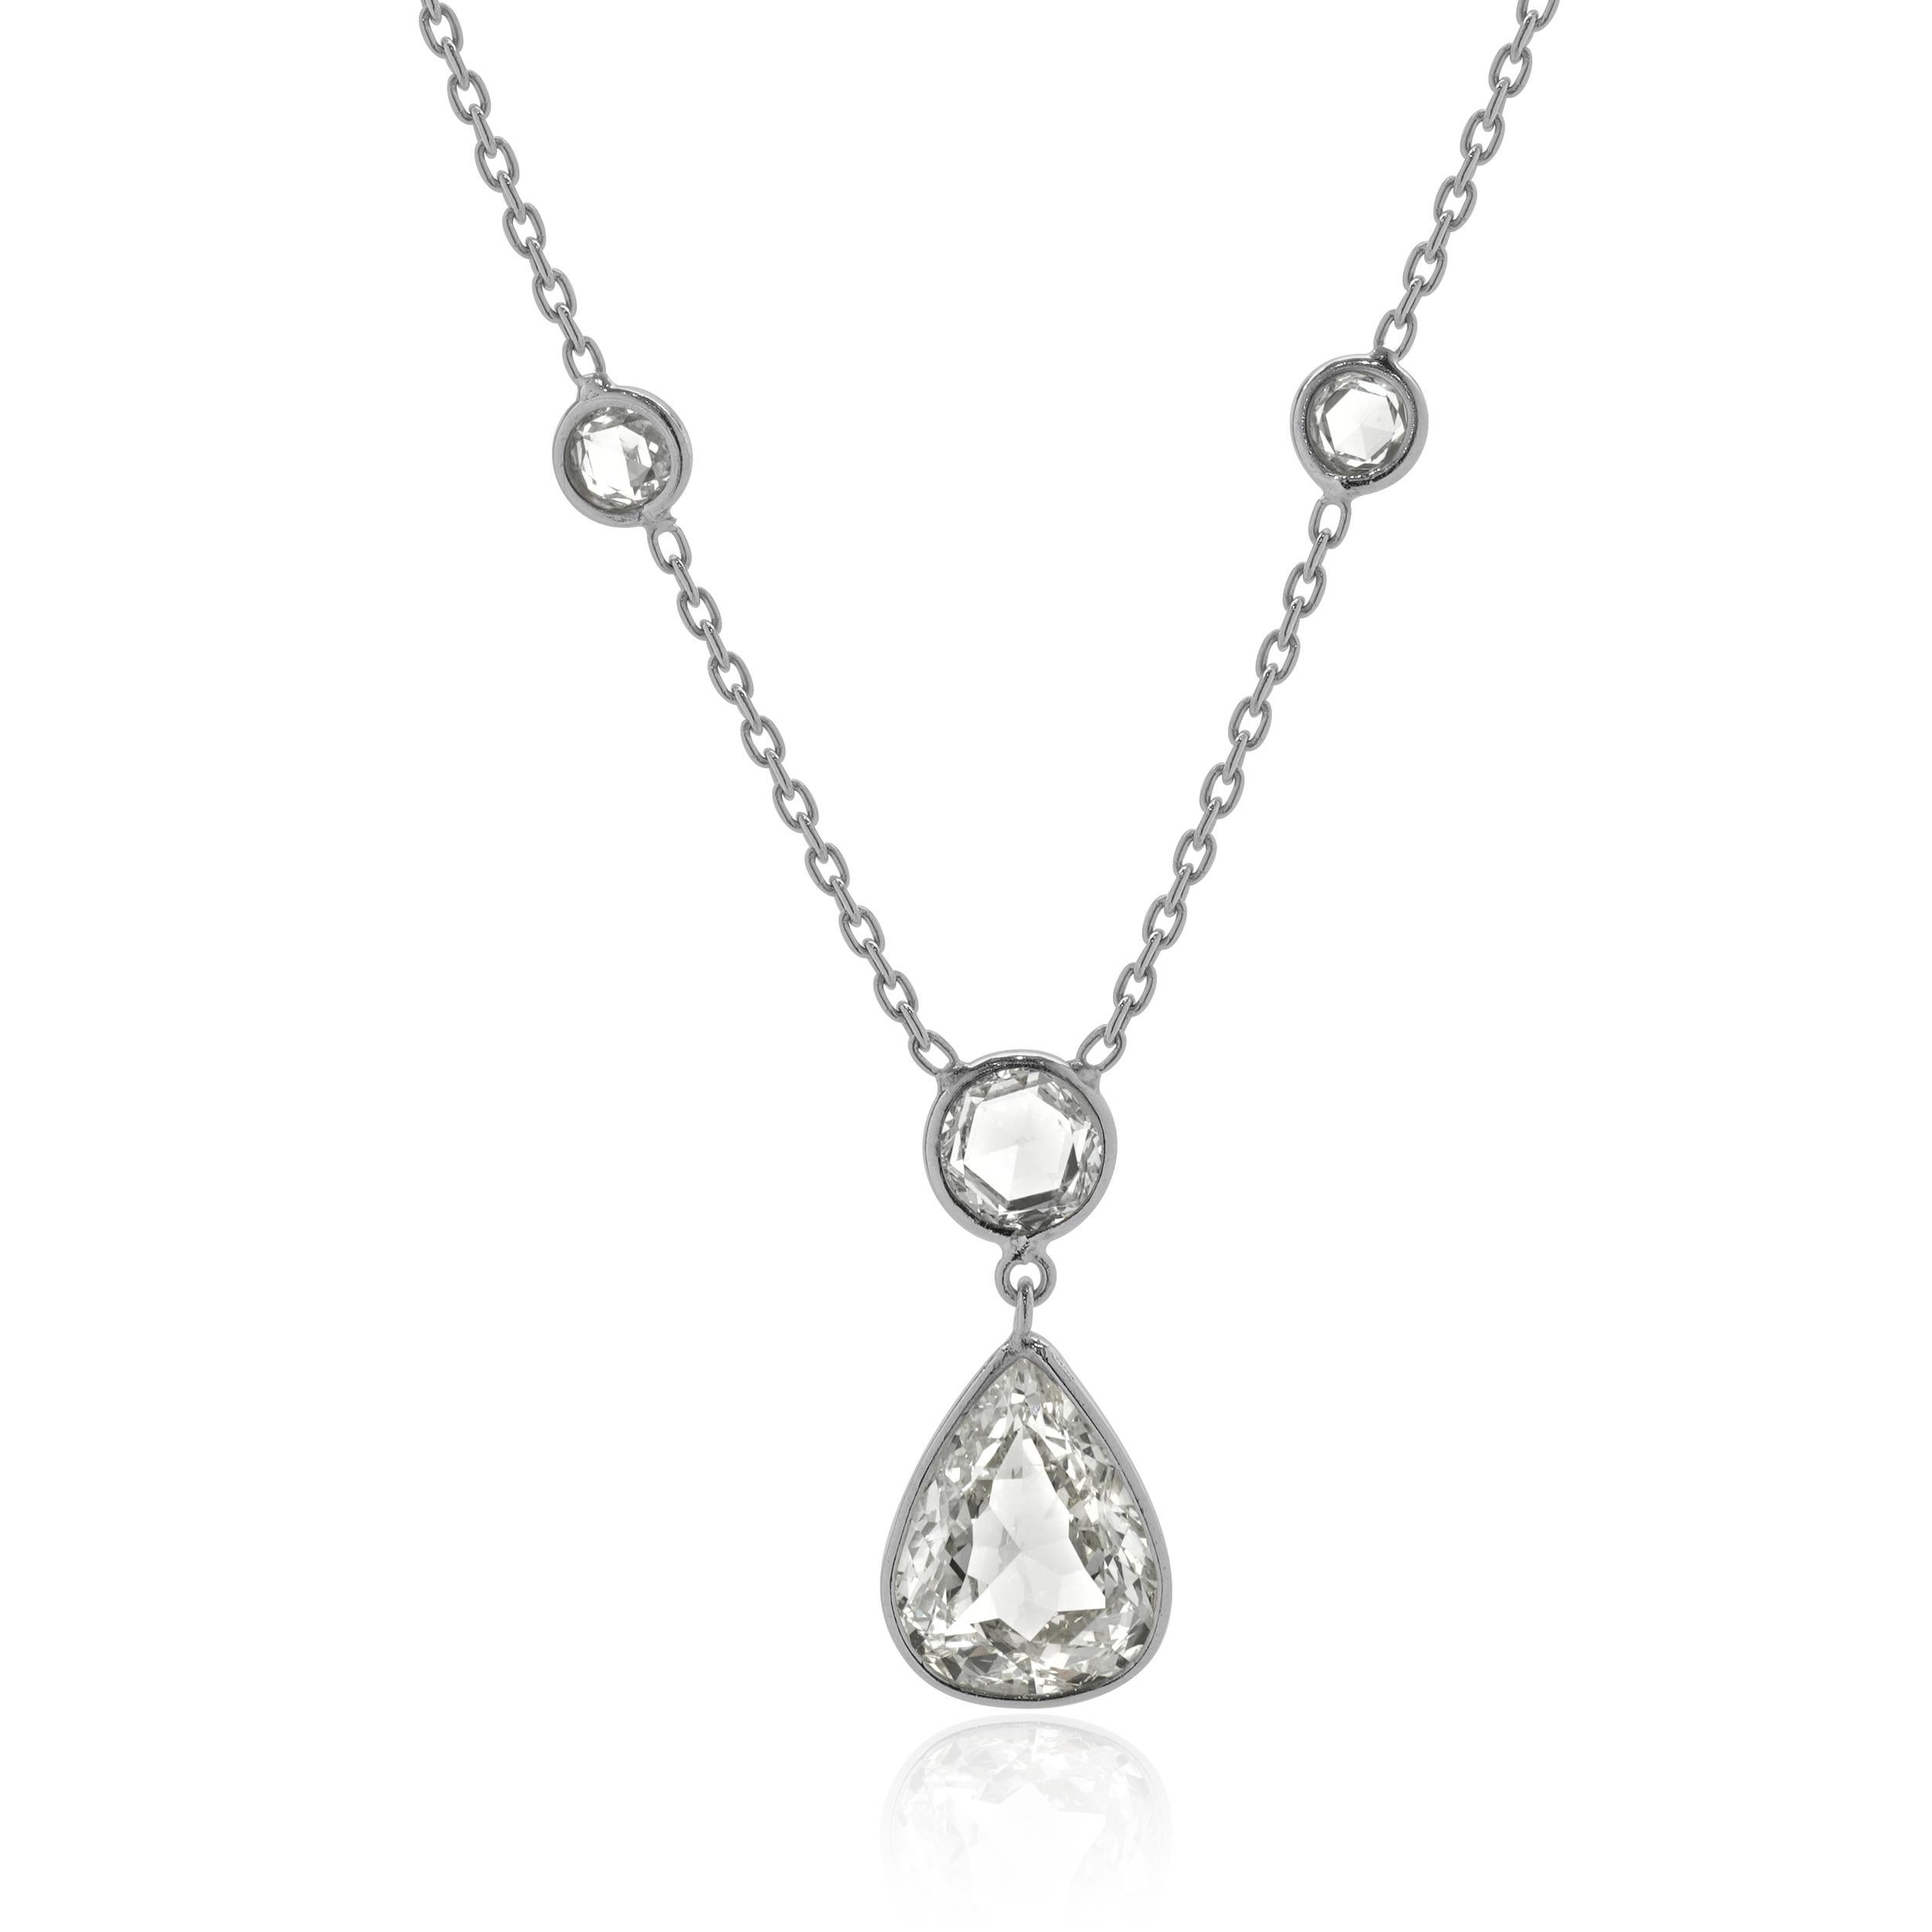 Designer: custom
Material: platinum
Diamonds: 1 pear cut = 1.65ct
Color: L
Clarity: SI1
Diamonds: 3 round rose cut = 0.59cttw
Color: H
Clarity: SI1
Dimensions: necklace measures 18-inches in length 
Weight: 3.45 grams